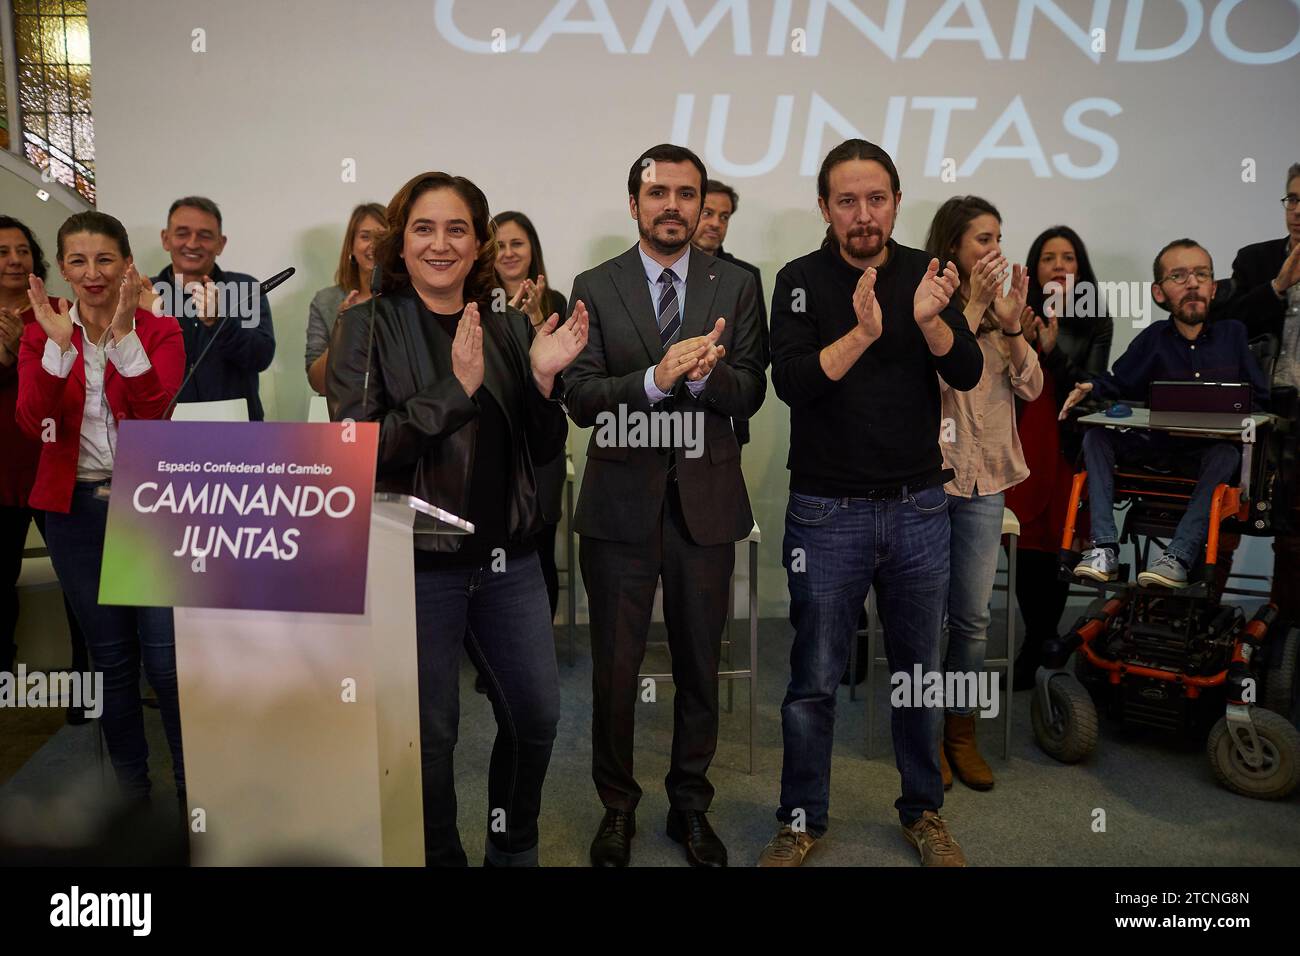 Madrid, 02/22/2020. Political event by Unidas Podemos at the Diario Madrid Foundation under the motto «Confederal Space of Change. Walking together', with Pablo Iglesias, Alberto Garzón, Yolanda Díaz, Irene Montero, Ada Colau and Pablo Echenique, among others. Photo: Guillermo Navarro. ARCHDC. Credit: Album / Archivo ABC / Guillermo Navarro Stock Photo